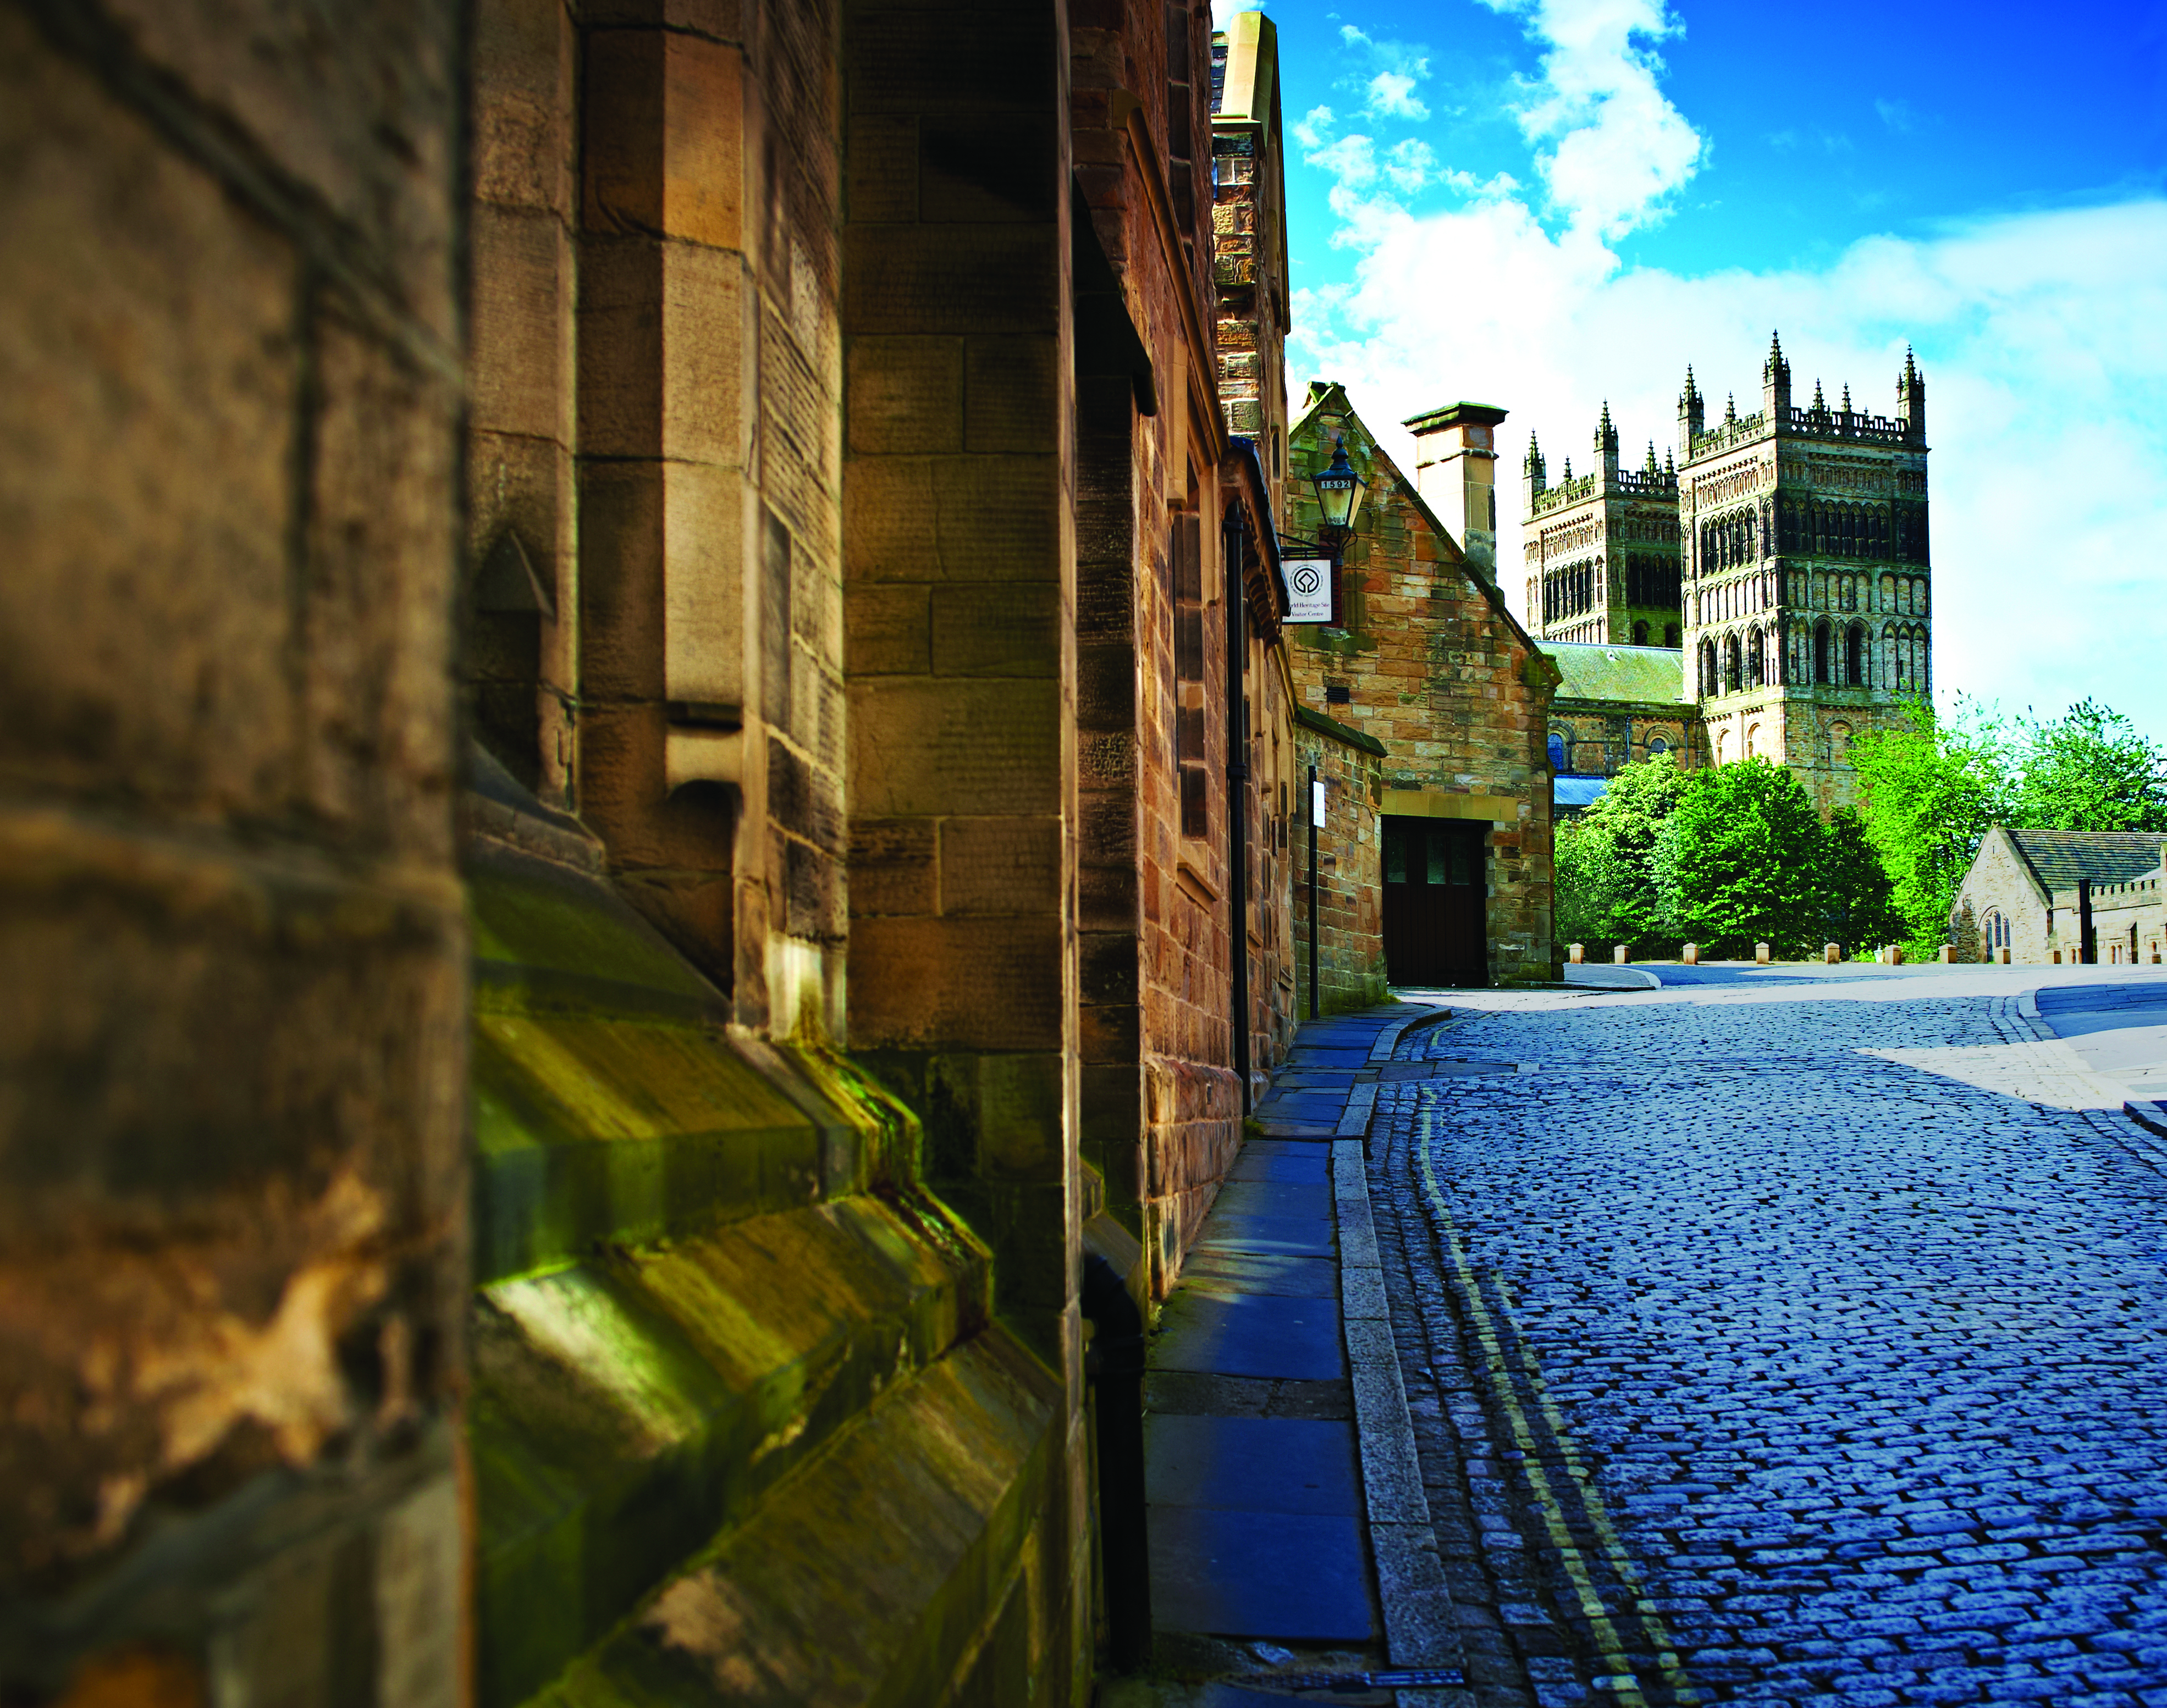 TCobbled street leading up to Durham Cathedral.